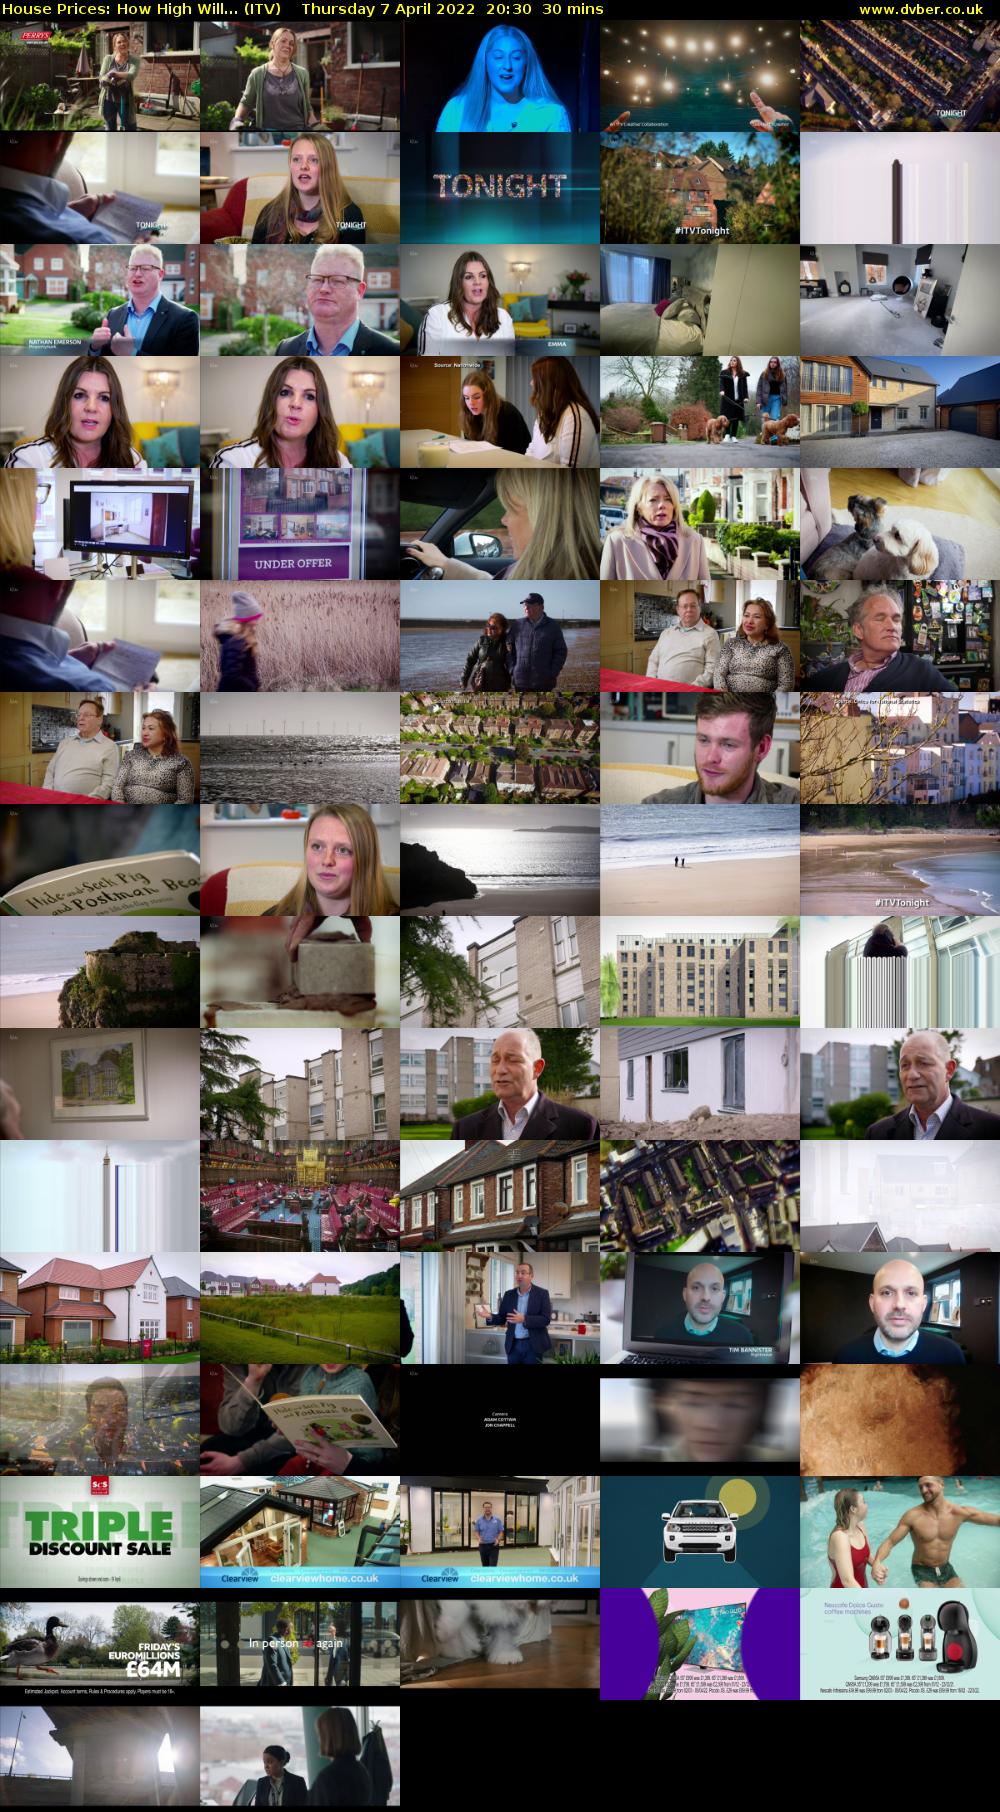 House Prices: How High Will... (ITV) Thursday 7 April 2022 20:30 - 21:00